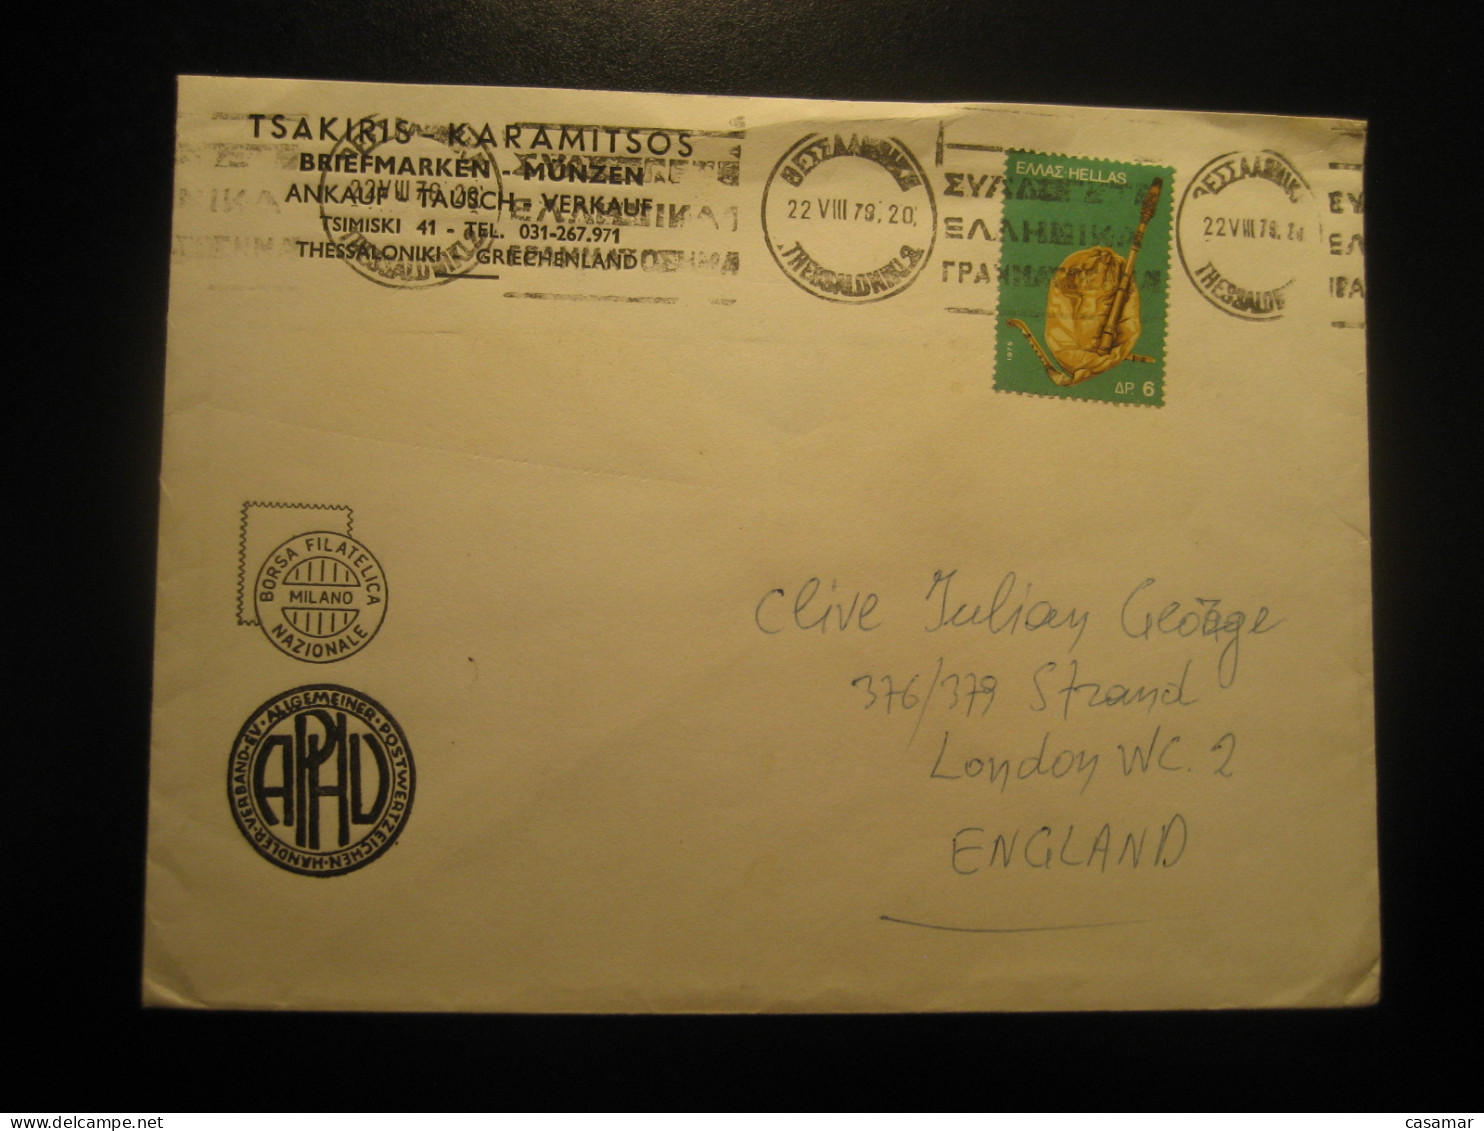 THESSALONIKI 1979 To London England Cancel Cover Stamp GREECE - Lettres & Documents